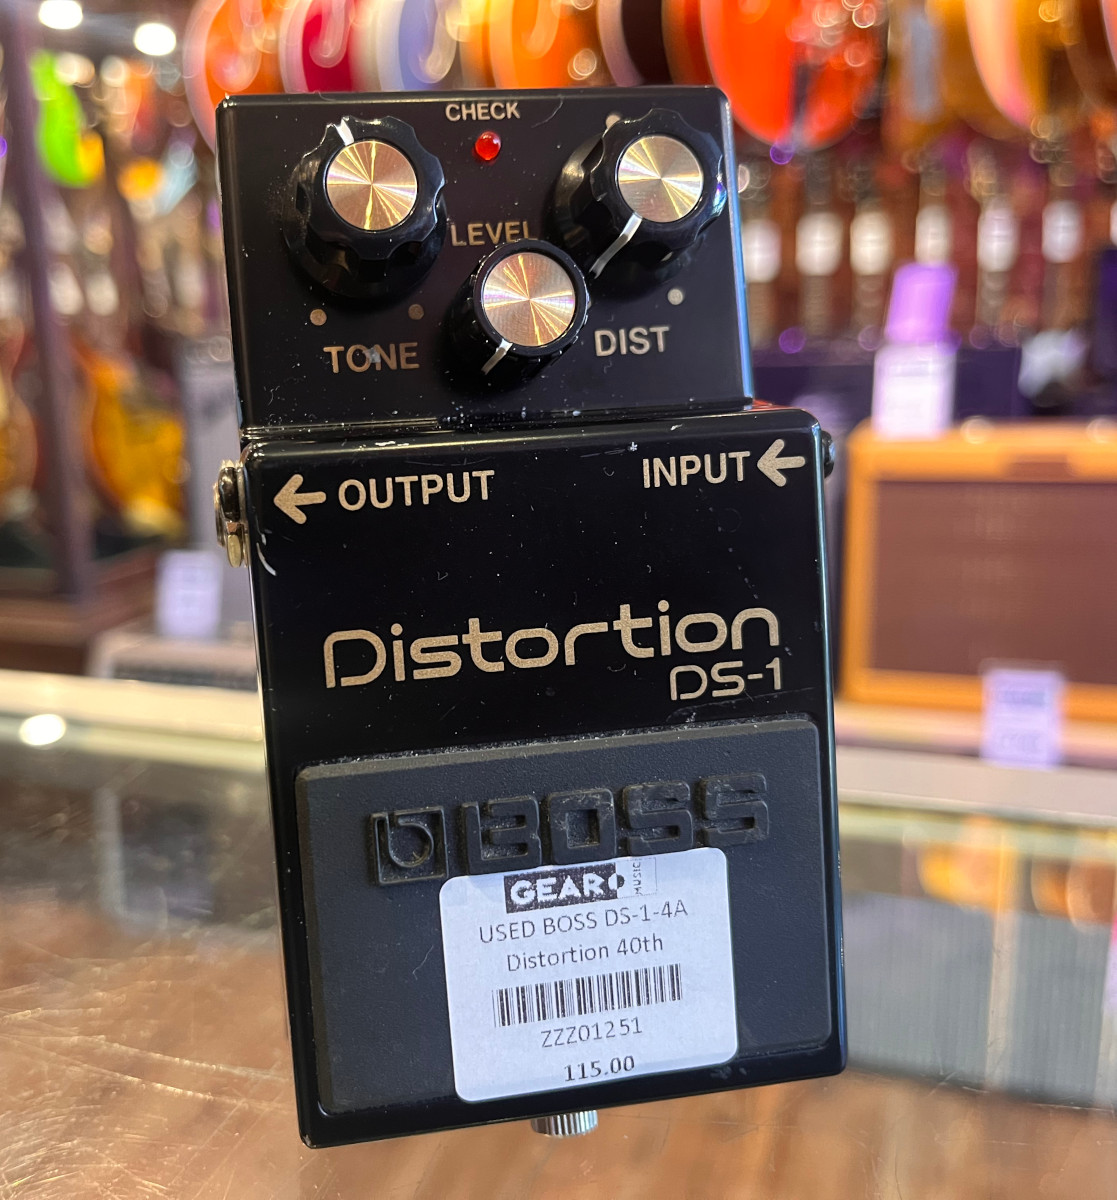 USED BOSS DS-1-4A Distortion 40th Anniversary Edition Black 